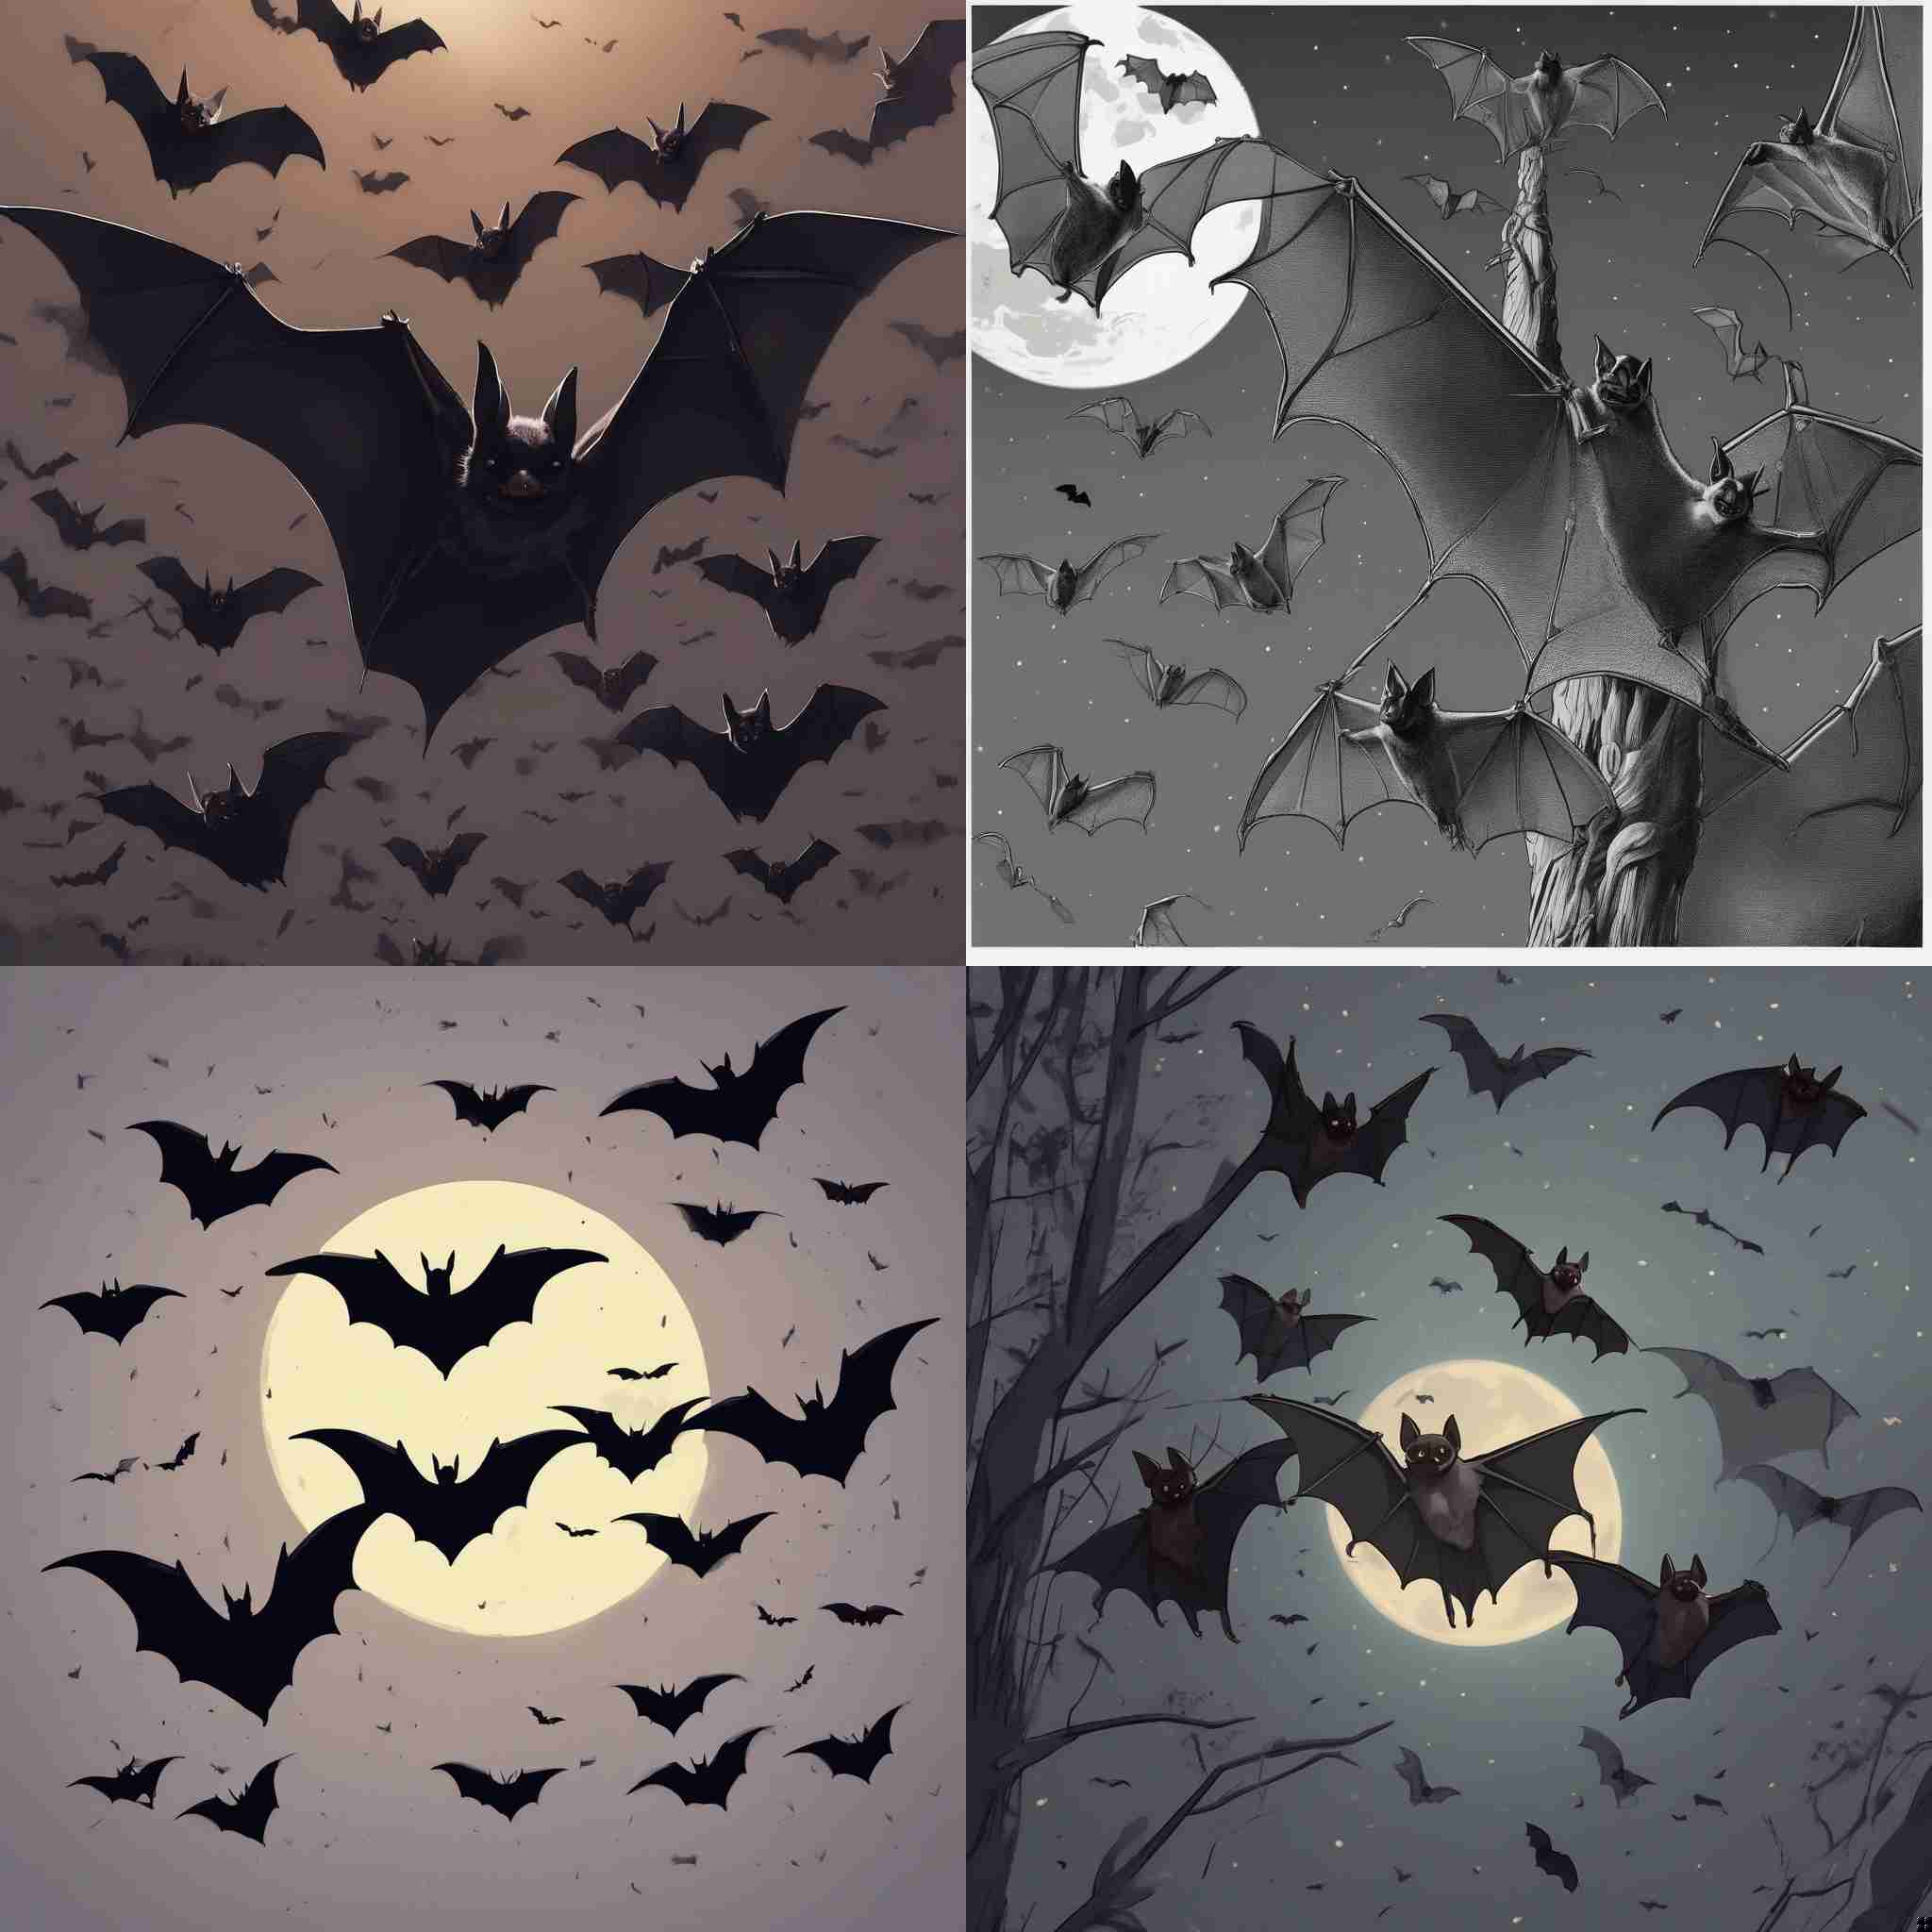 Bats during the night